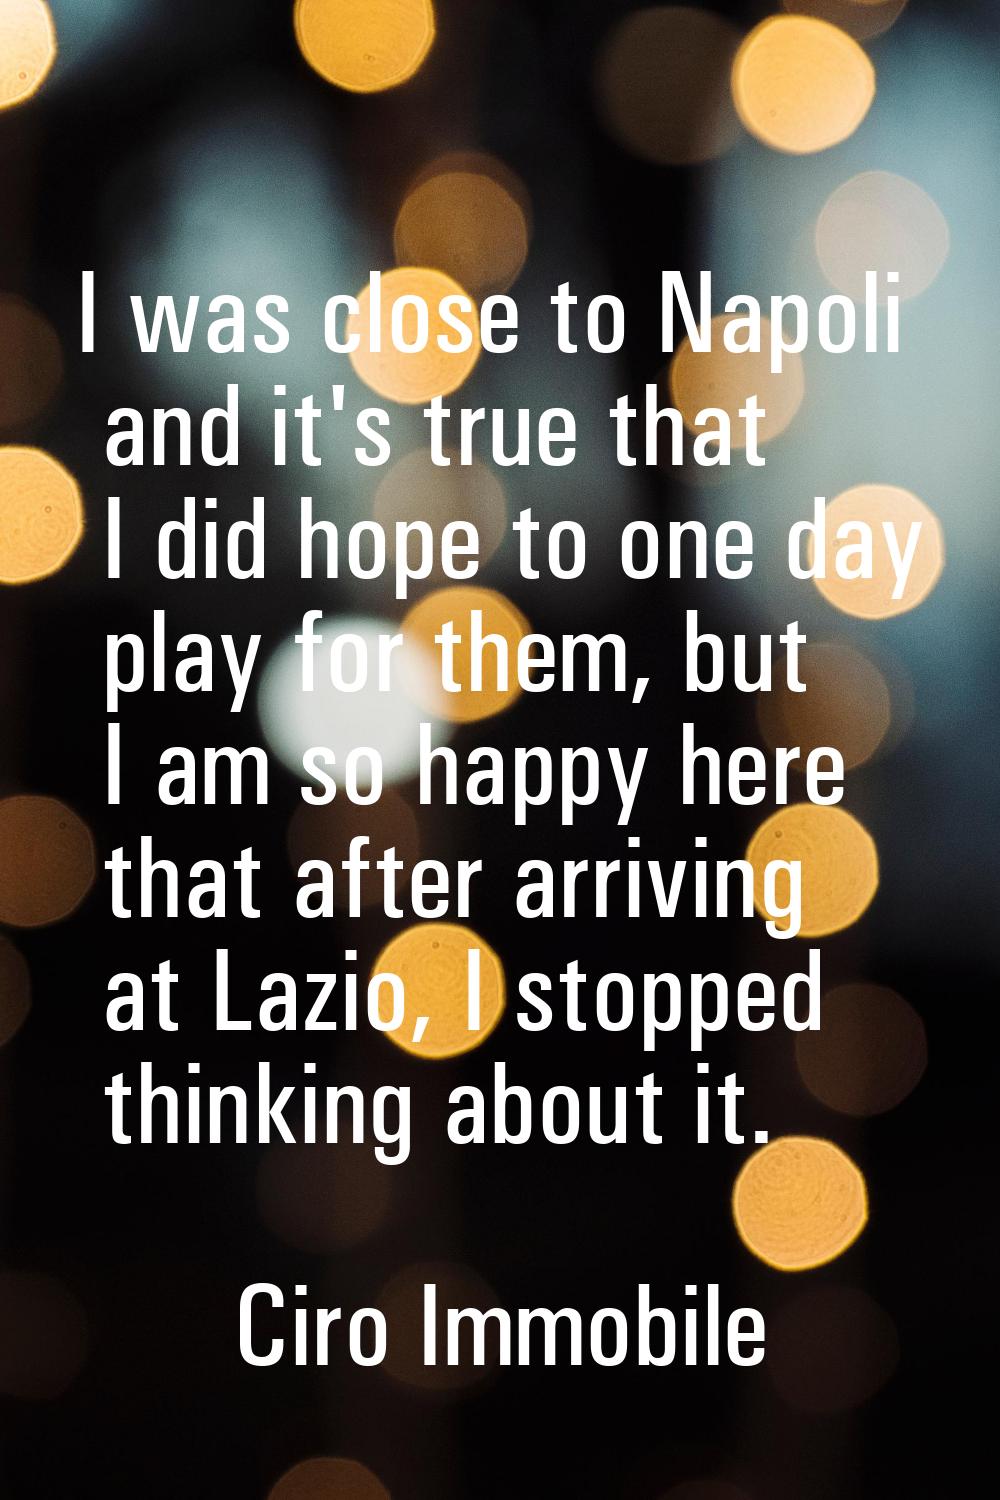 I was close to Napoli and it's true that I did hope to one day play for them, but I am so happy her